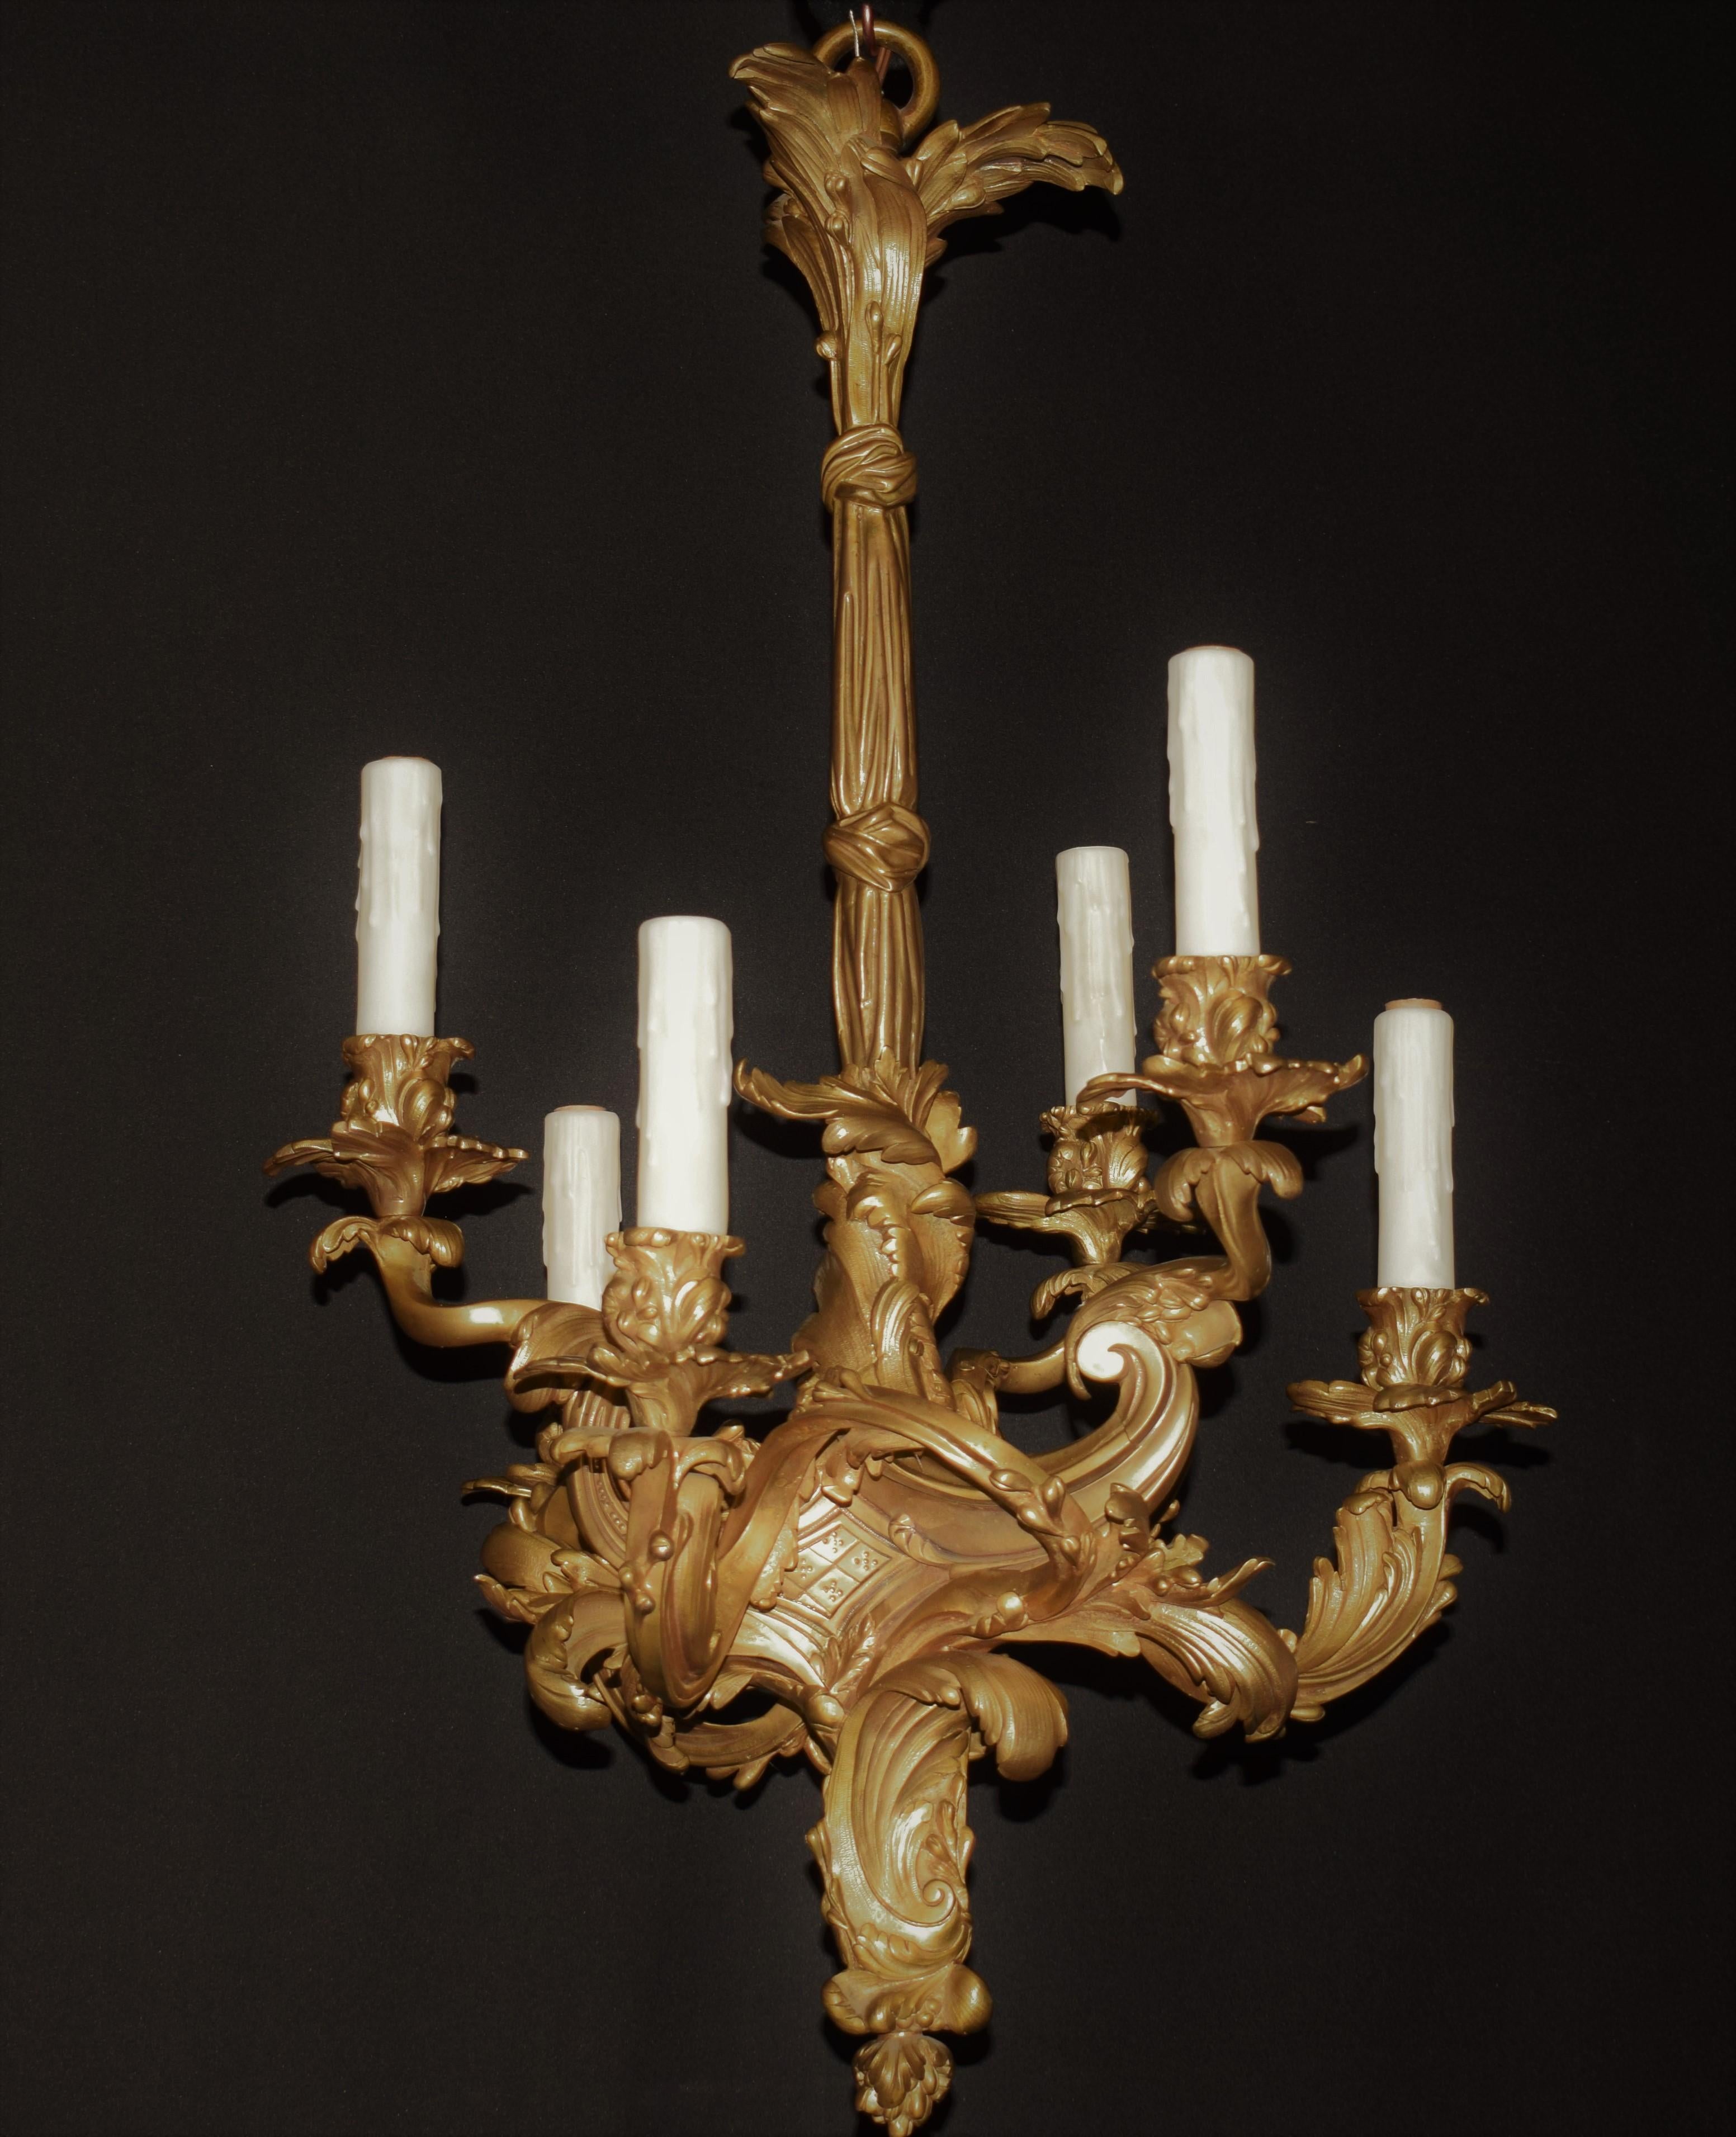 Louis XV style gilt bronze chandelier. A very fine gilt bronze chandelier in the Louis XV style.,
France, circa 1900. 6 lights.
Dimensions: Height 29